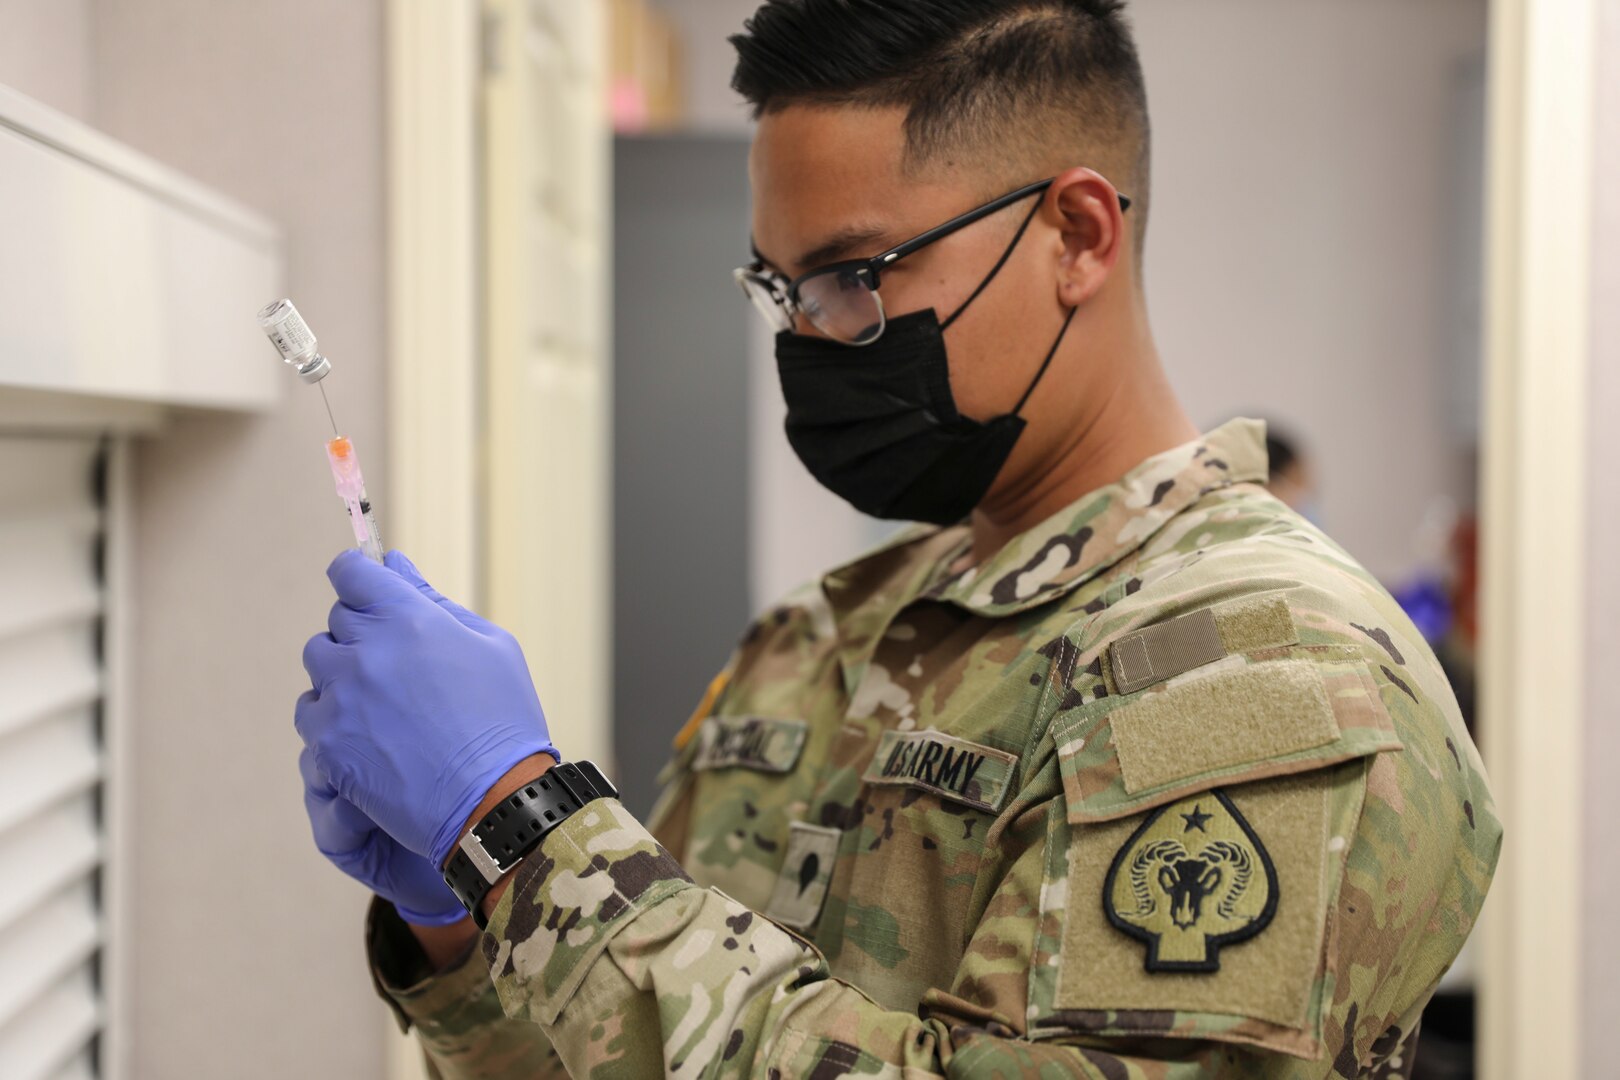 Nevada National Guard Spc. Exequiel Pascual with Joint Task Force 17 measures a dose of the Janssen vaccine at a mobile vaccination unit site in Pahrump, Nevada, April 8, 2021. The Guard and partners and helping facilitate access to the COVID-19 vaccine in rural Nevada.